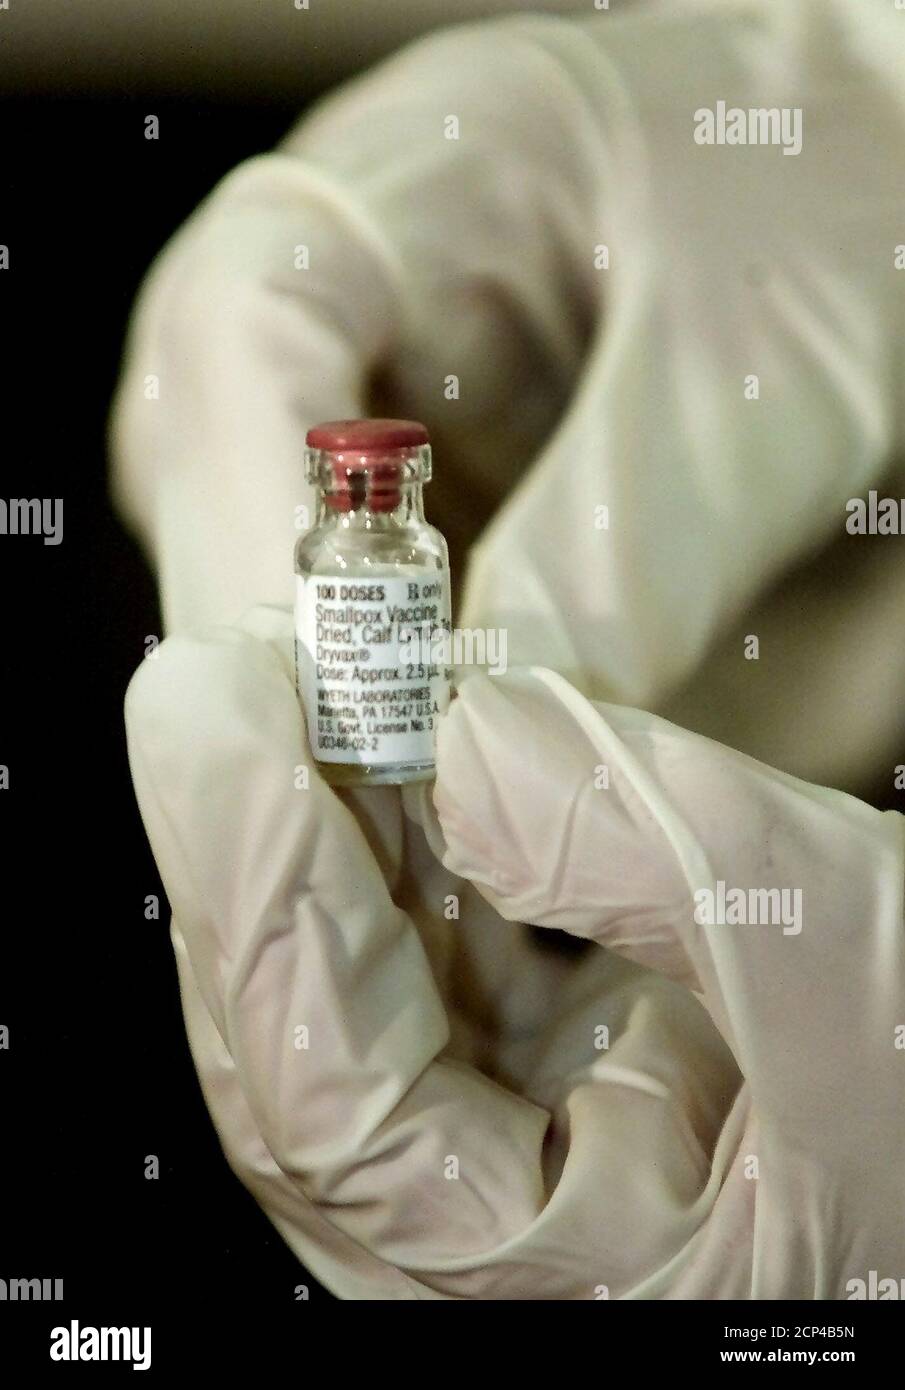 A doctor at the University of Connecticut Health Center holds the smallpox vaccine used to inoculate volunteer health care workers January 24, 2003 in Farmington, Connecticut. The doctors vaccinated today in Connecticut are the first volunteer participants in the U.S. Government's national plan to vaccinate up to 500,000 health care workers and emergency workers against the dangers of a smallpox outbreak that might result from a terror attack. REUTERS/Jim Bourg  JRB Stock Photo